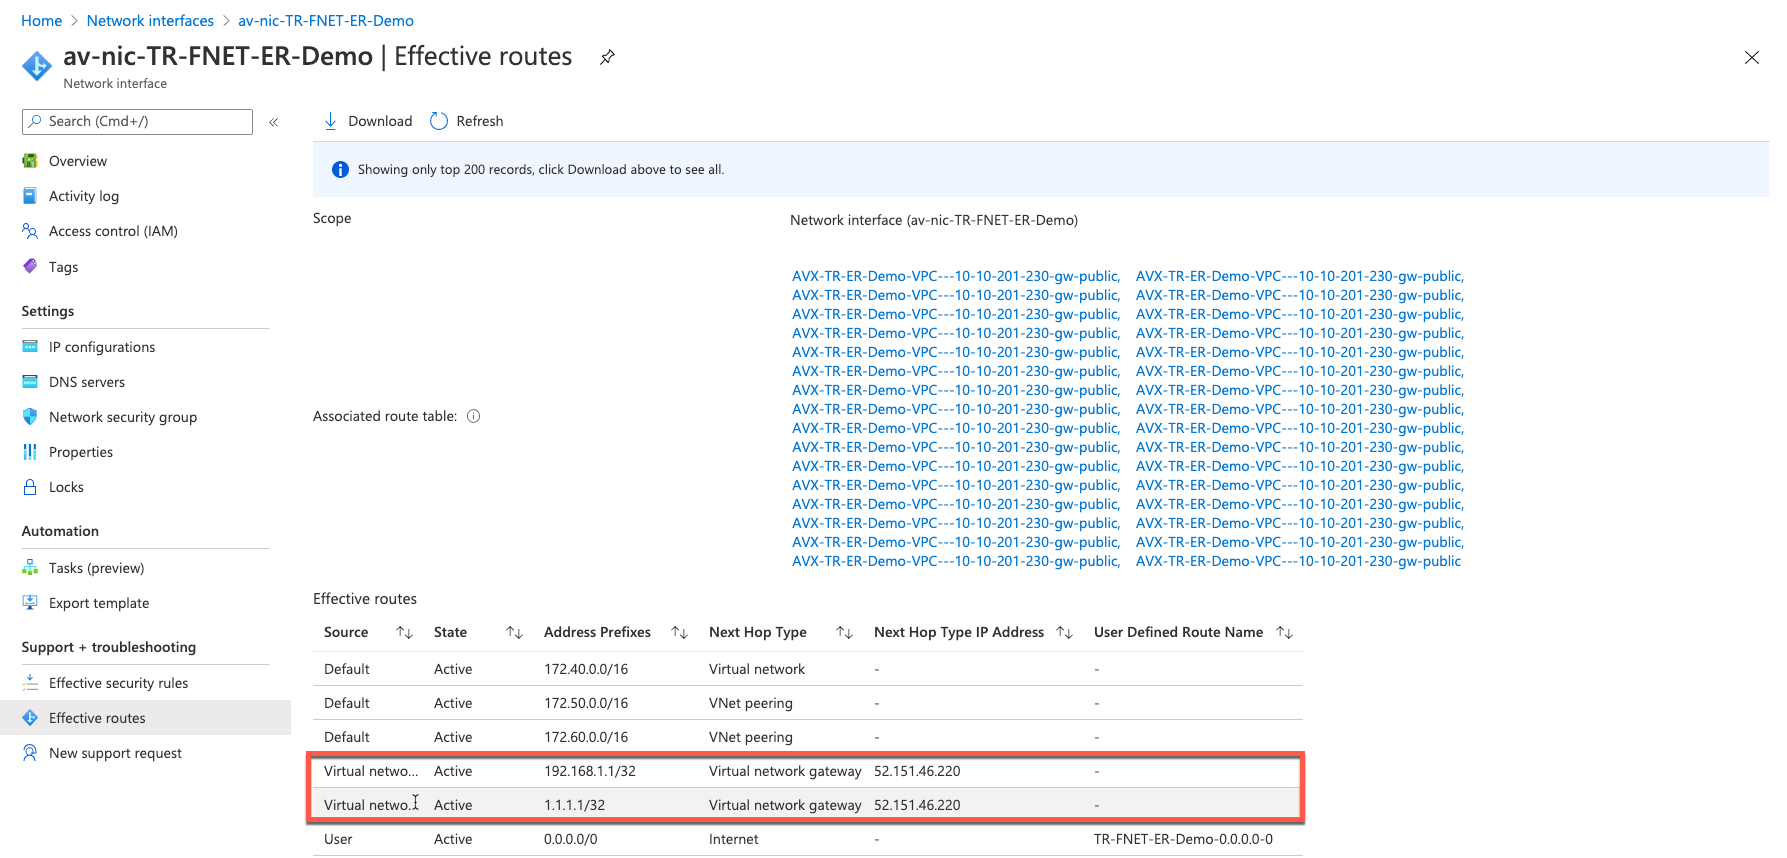 azure_effective_routes_routing_entry